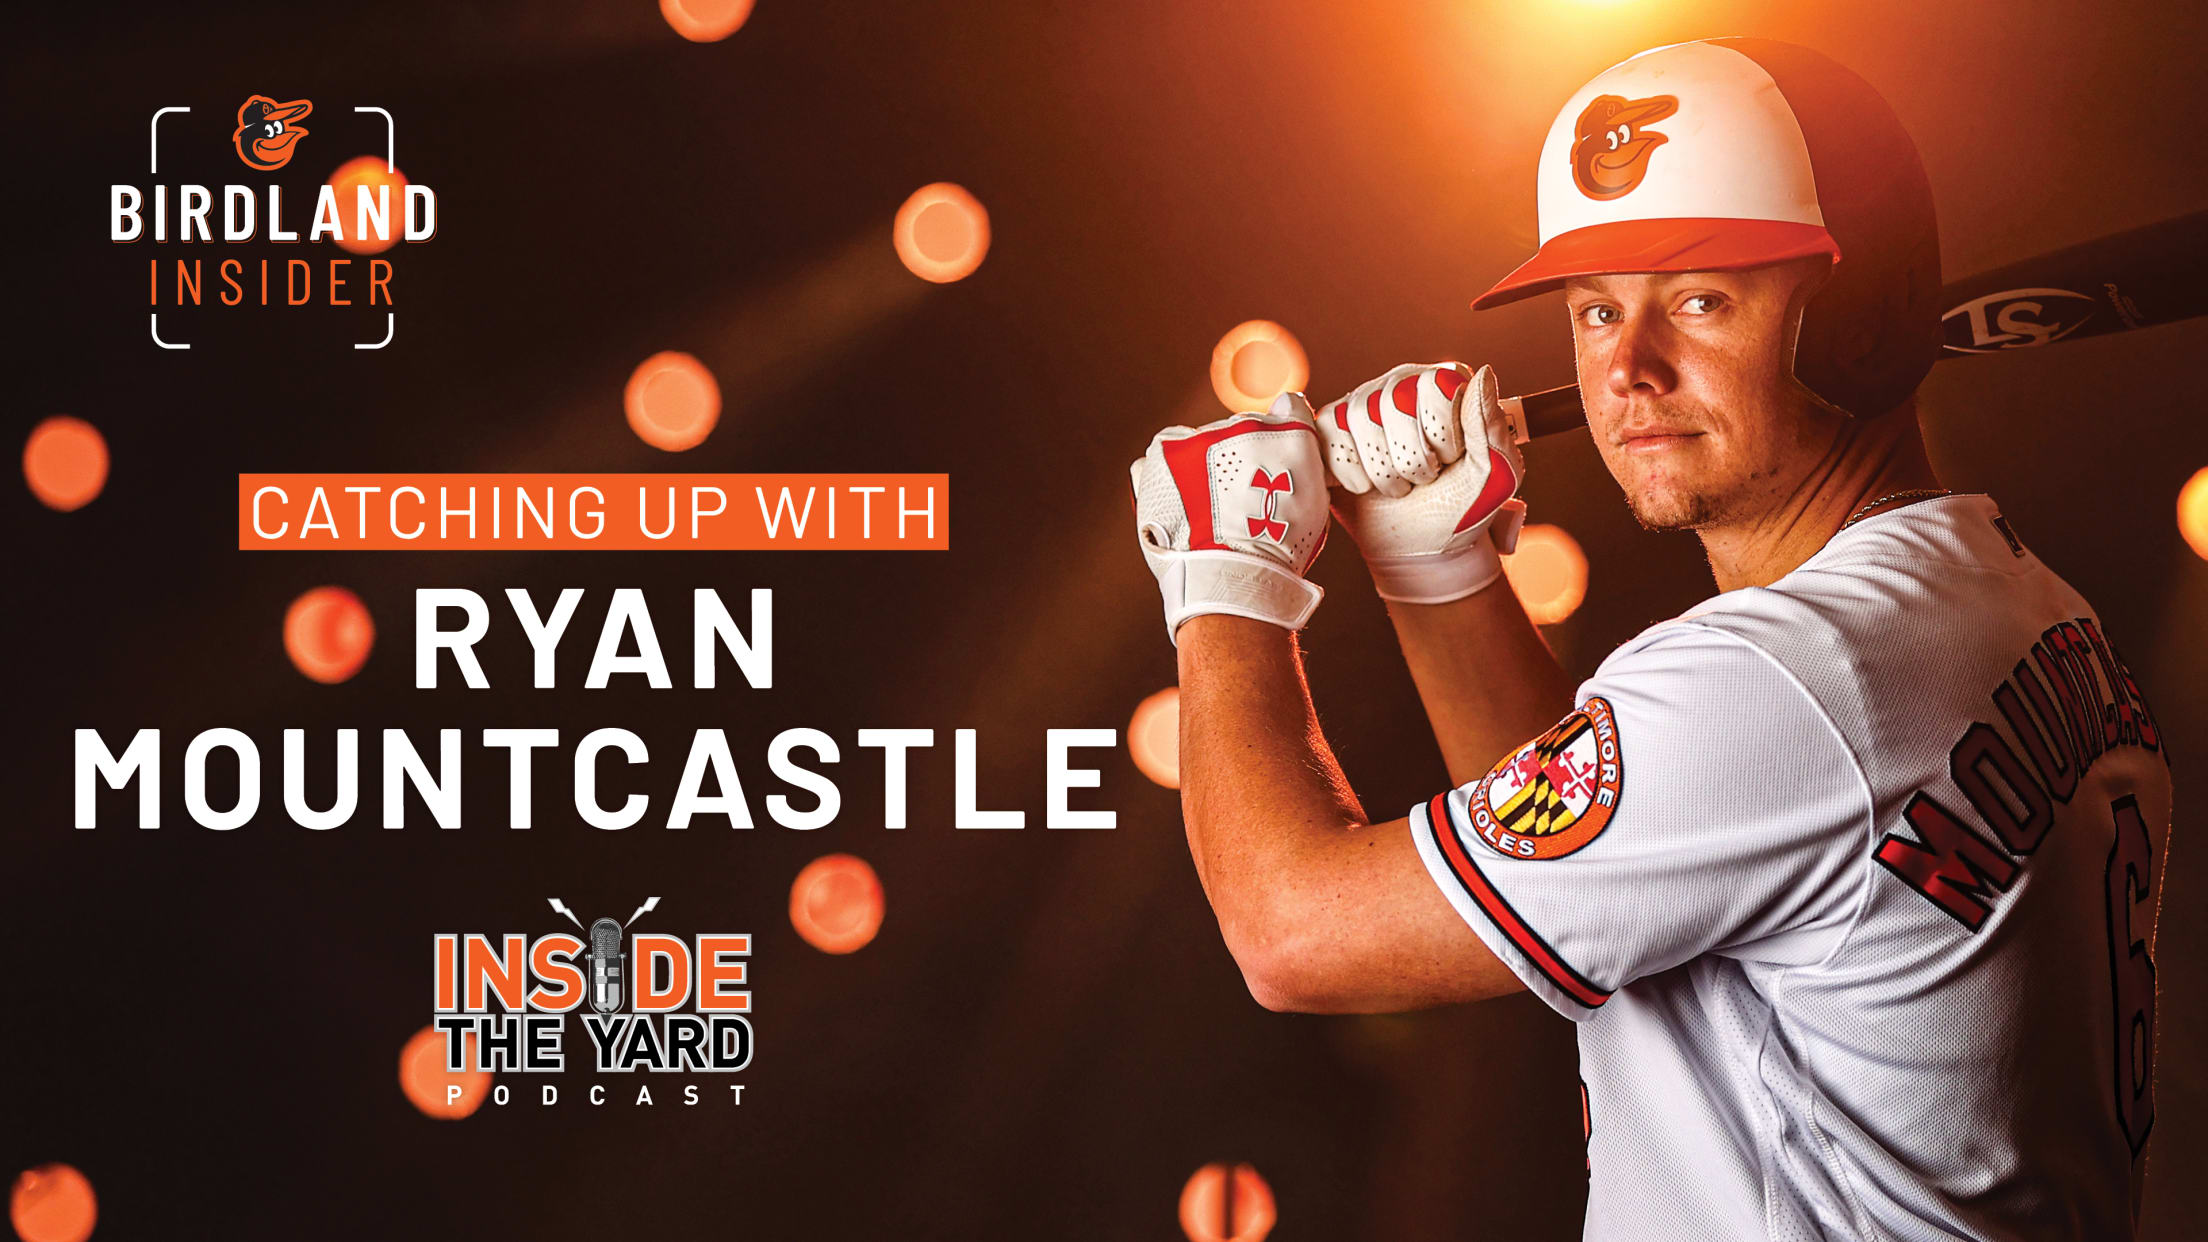 bal-catching-up-with-ryan-mountcastle-header